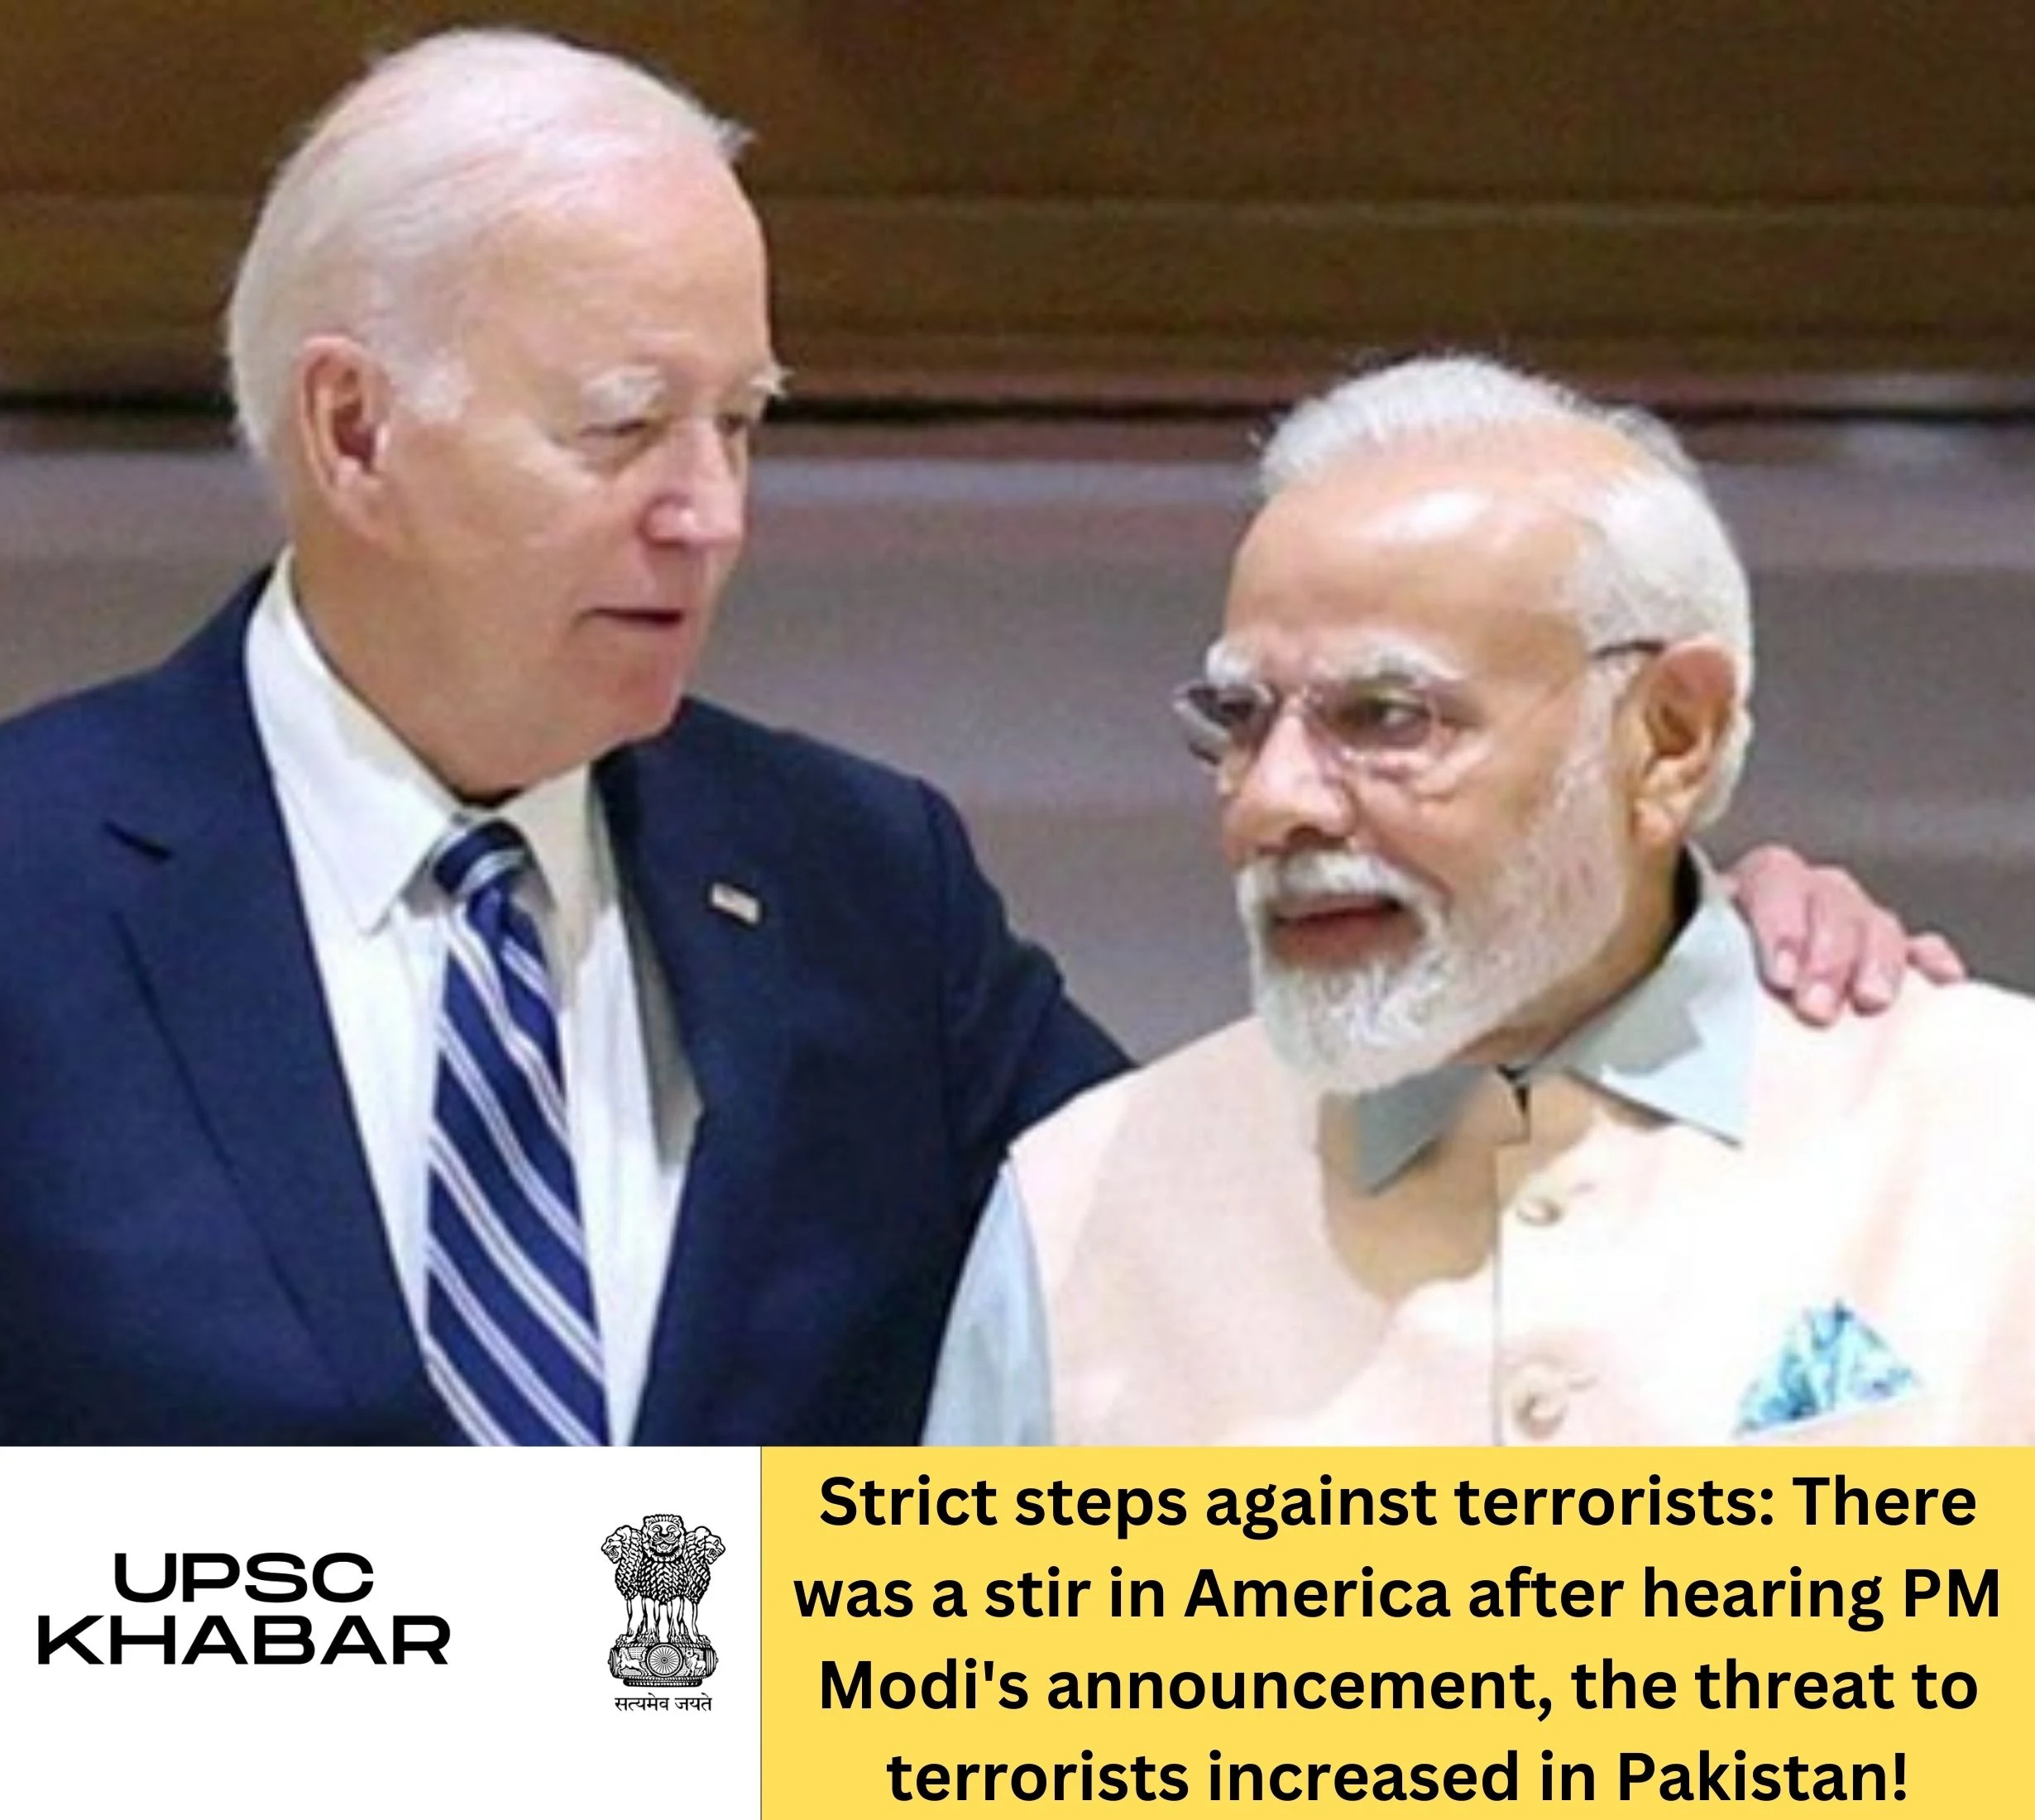 Strict steps against terrorists: There was a stir in America after hearing PM Modi's announcement, the threat to terrorists increased in Pakistan!